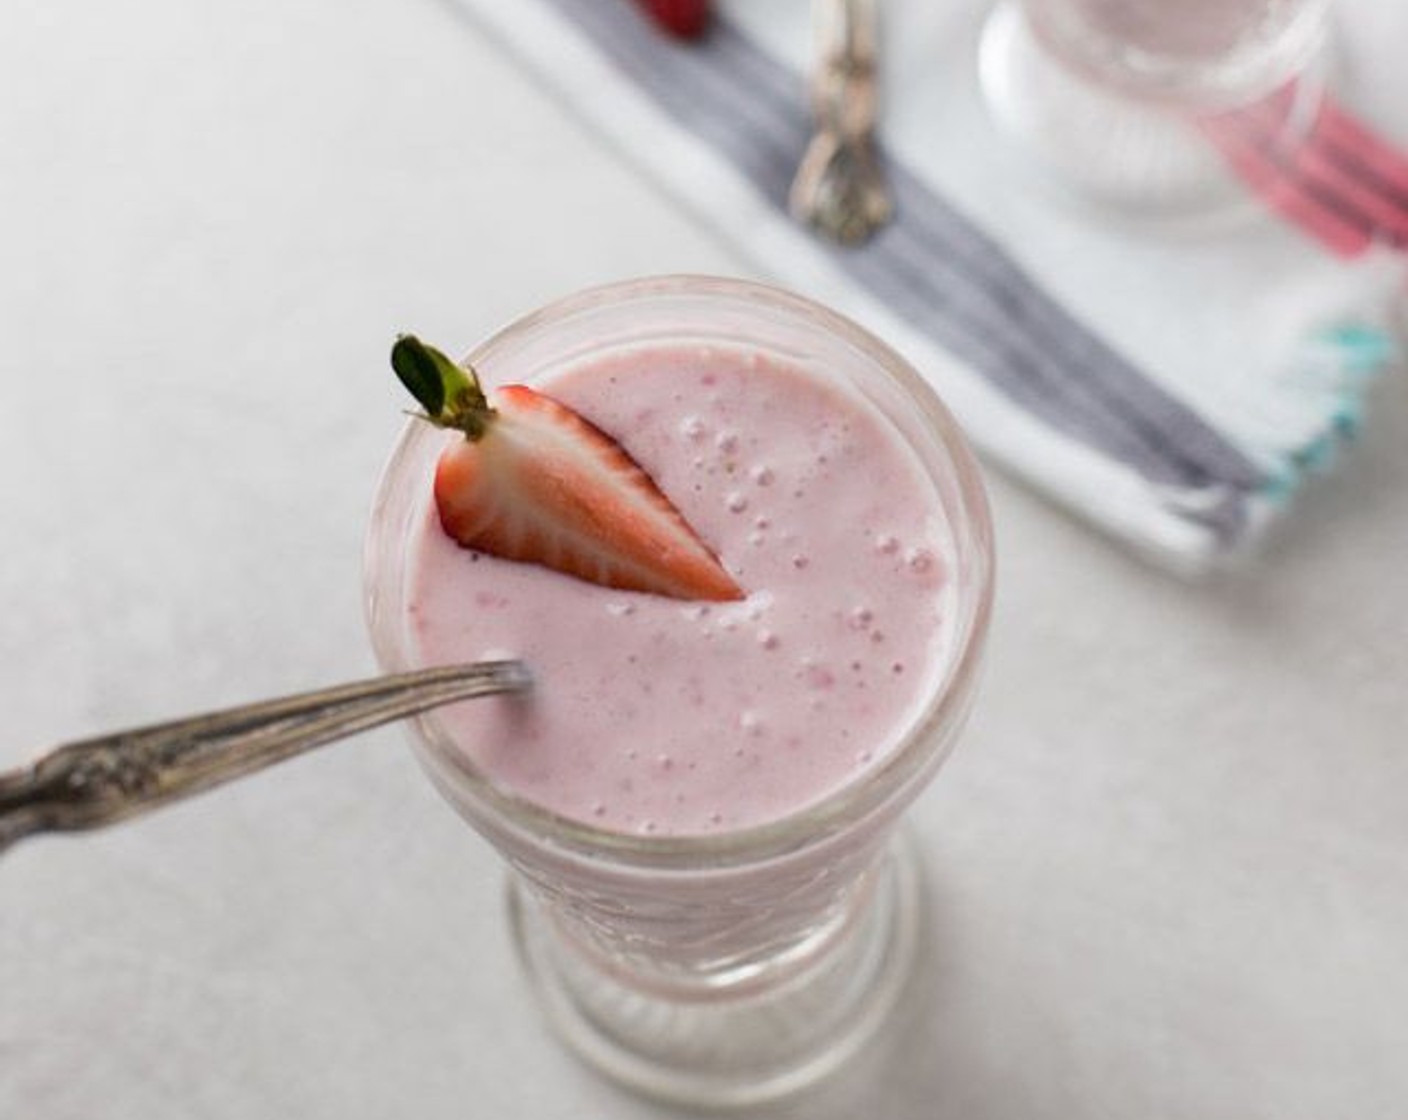 step 1 Blend Frozen Strawberries (1/2 cup), Banana (1/2), Plain Greek Yogurt (1/2 cup), Reduced-Fat Cream Cheese (3 Tbsp), 2% Reduced Fat Milk (1 cup), Honey (1 Tbsp) and Vanilla Extract (1/2 tsp) together. Refrigerate until ready to serve.